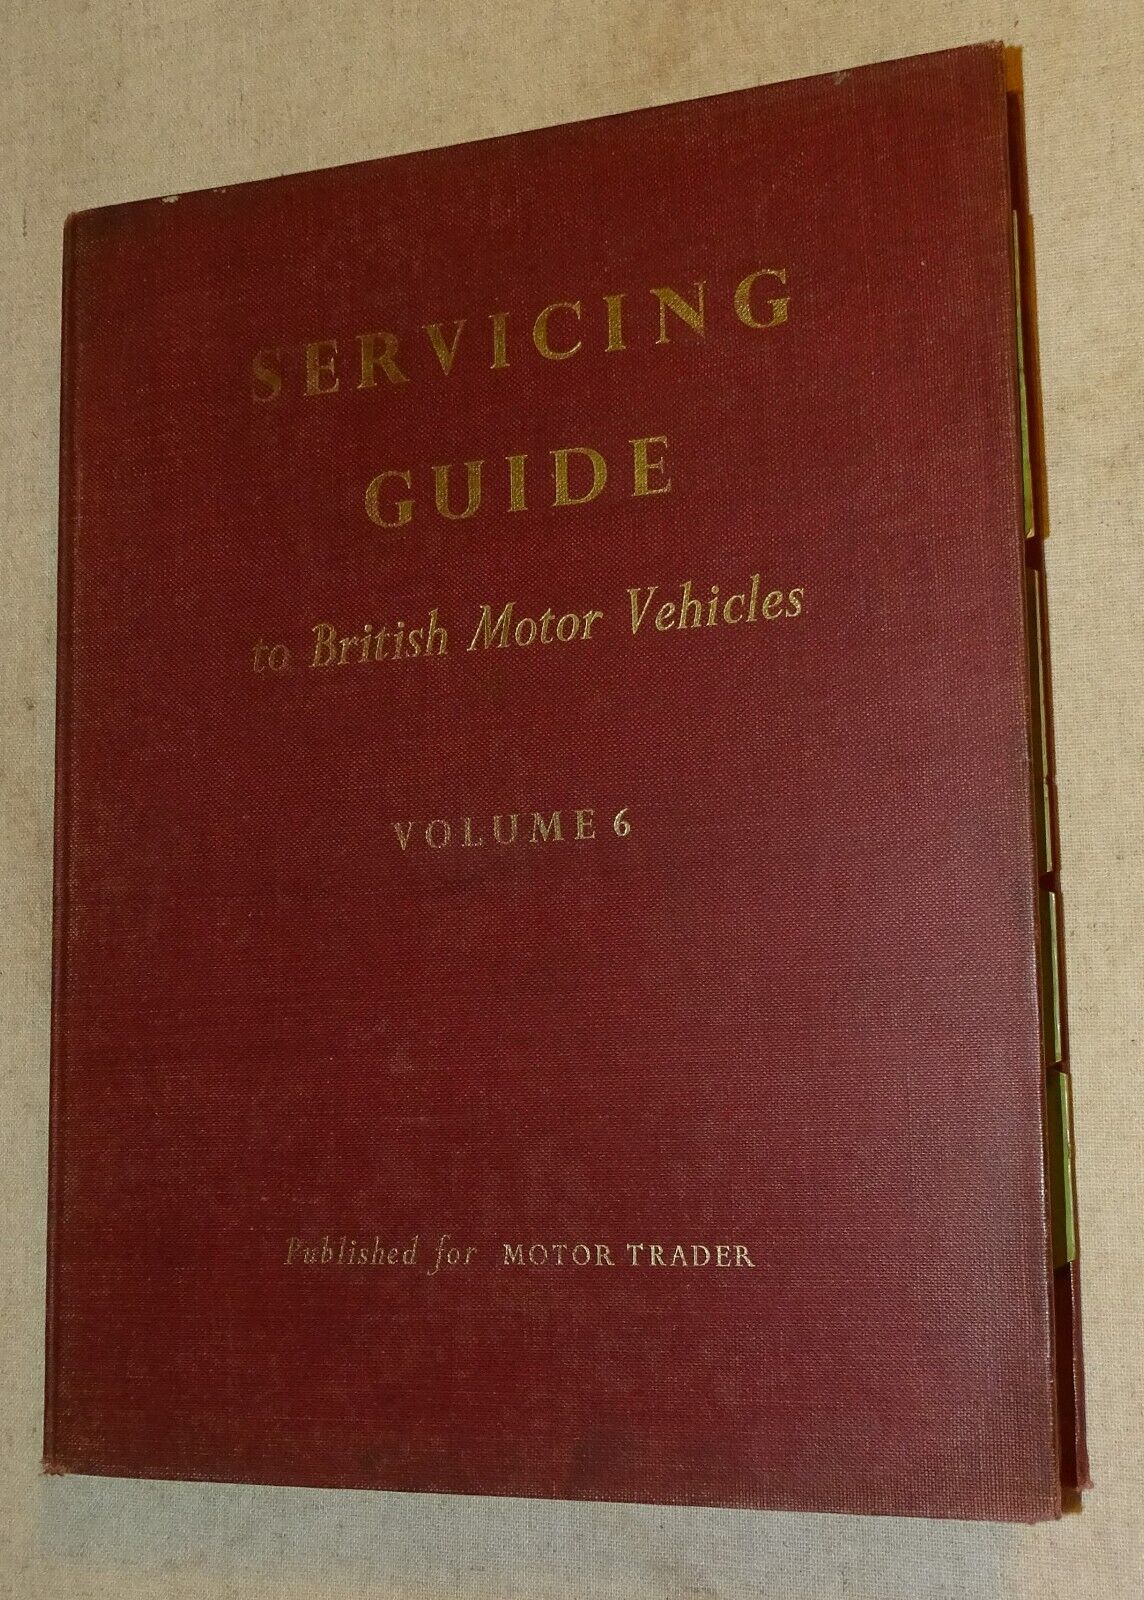 Servicing Guide to British Motor Vehicles Volume 6 (England, circa early 1960s)